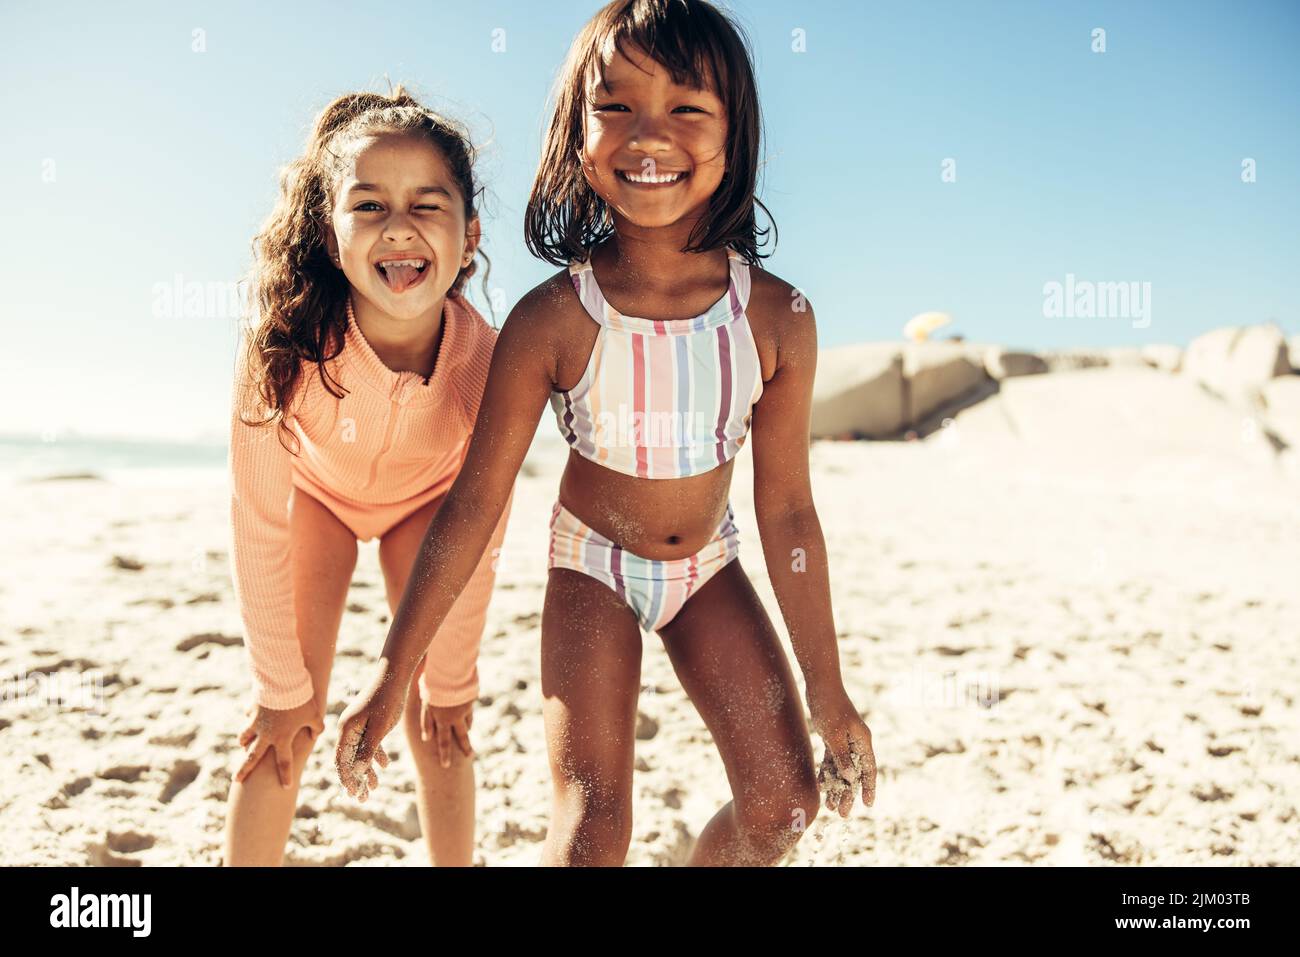 Adorable little girls having fun together at the beach during summer vacation. Two happy young kids smiling at the camera while covered in beach sand. Stock Photo